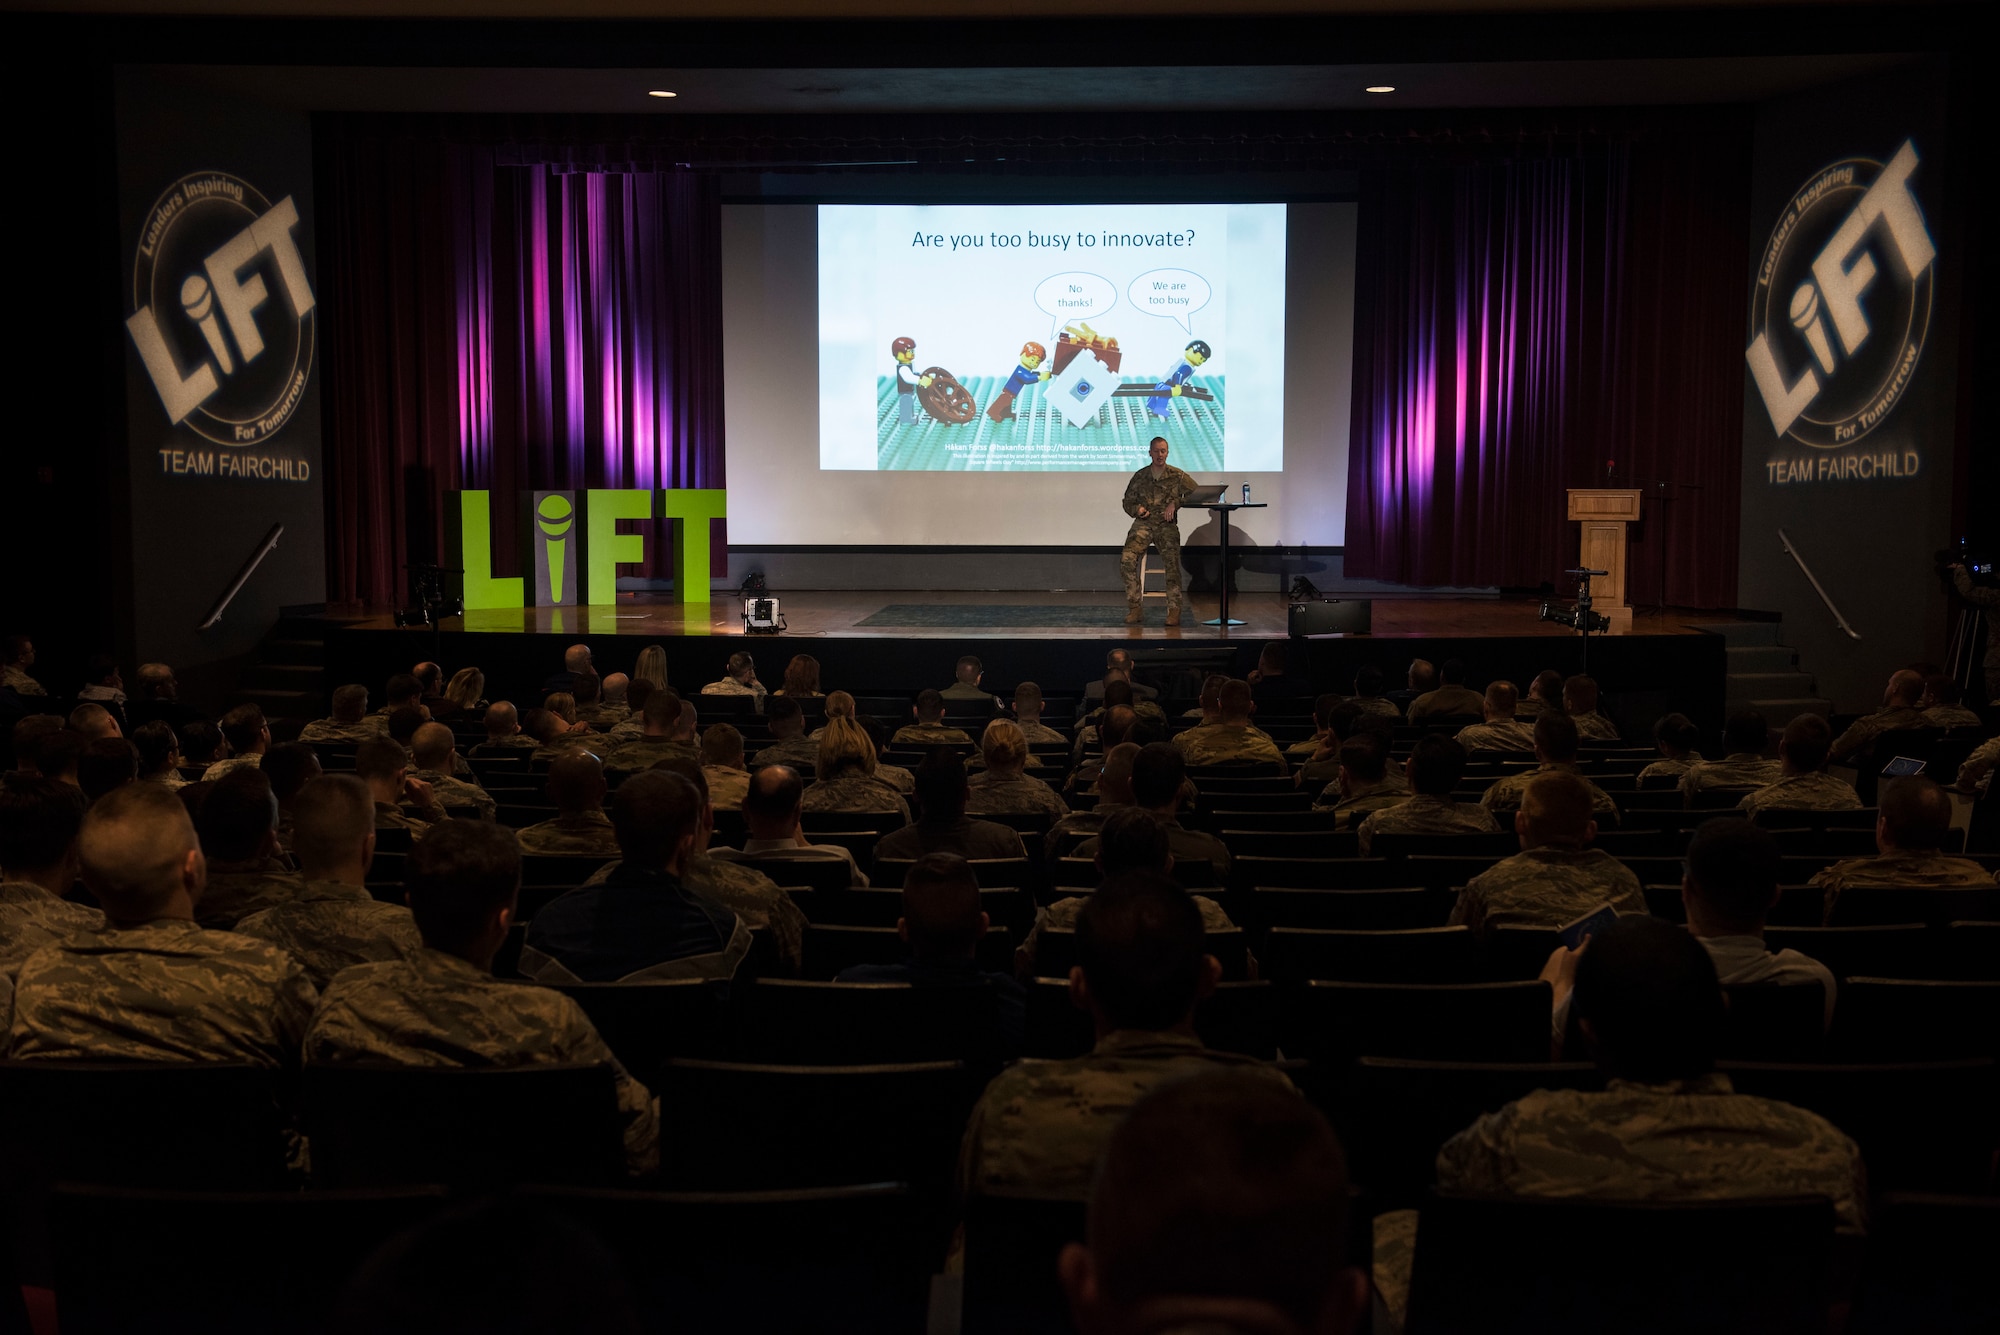 U.S. Air Force Maj. Mark Watson, 92nd Operations Group chief of training, speaks during the 2019 Leaders Inspiring for Tomorrow summit in the base theater at Fairchild Air Force Base, Washington, April 19, 2019. The 2019 LIFT summit shifted its focus from its 2018 theme of developing leadership skills, to developing and promoting innovation. (U.S. Air Force photo by Airman 1st Class Lawrence Sena)